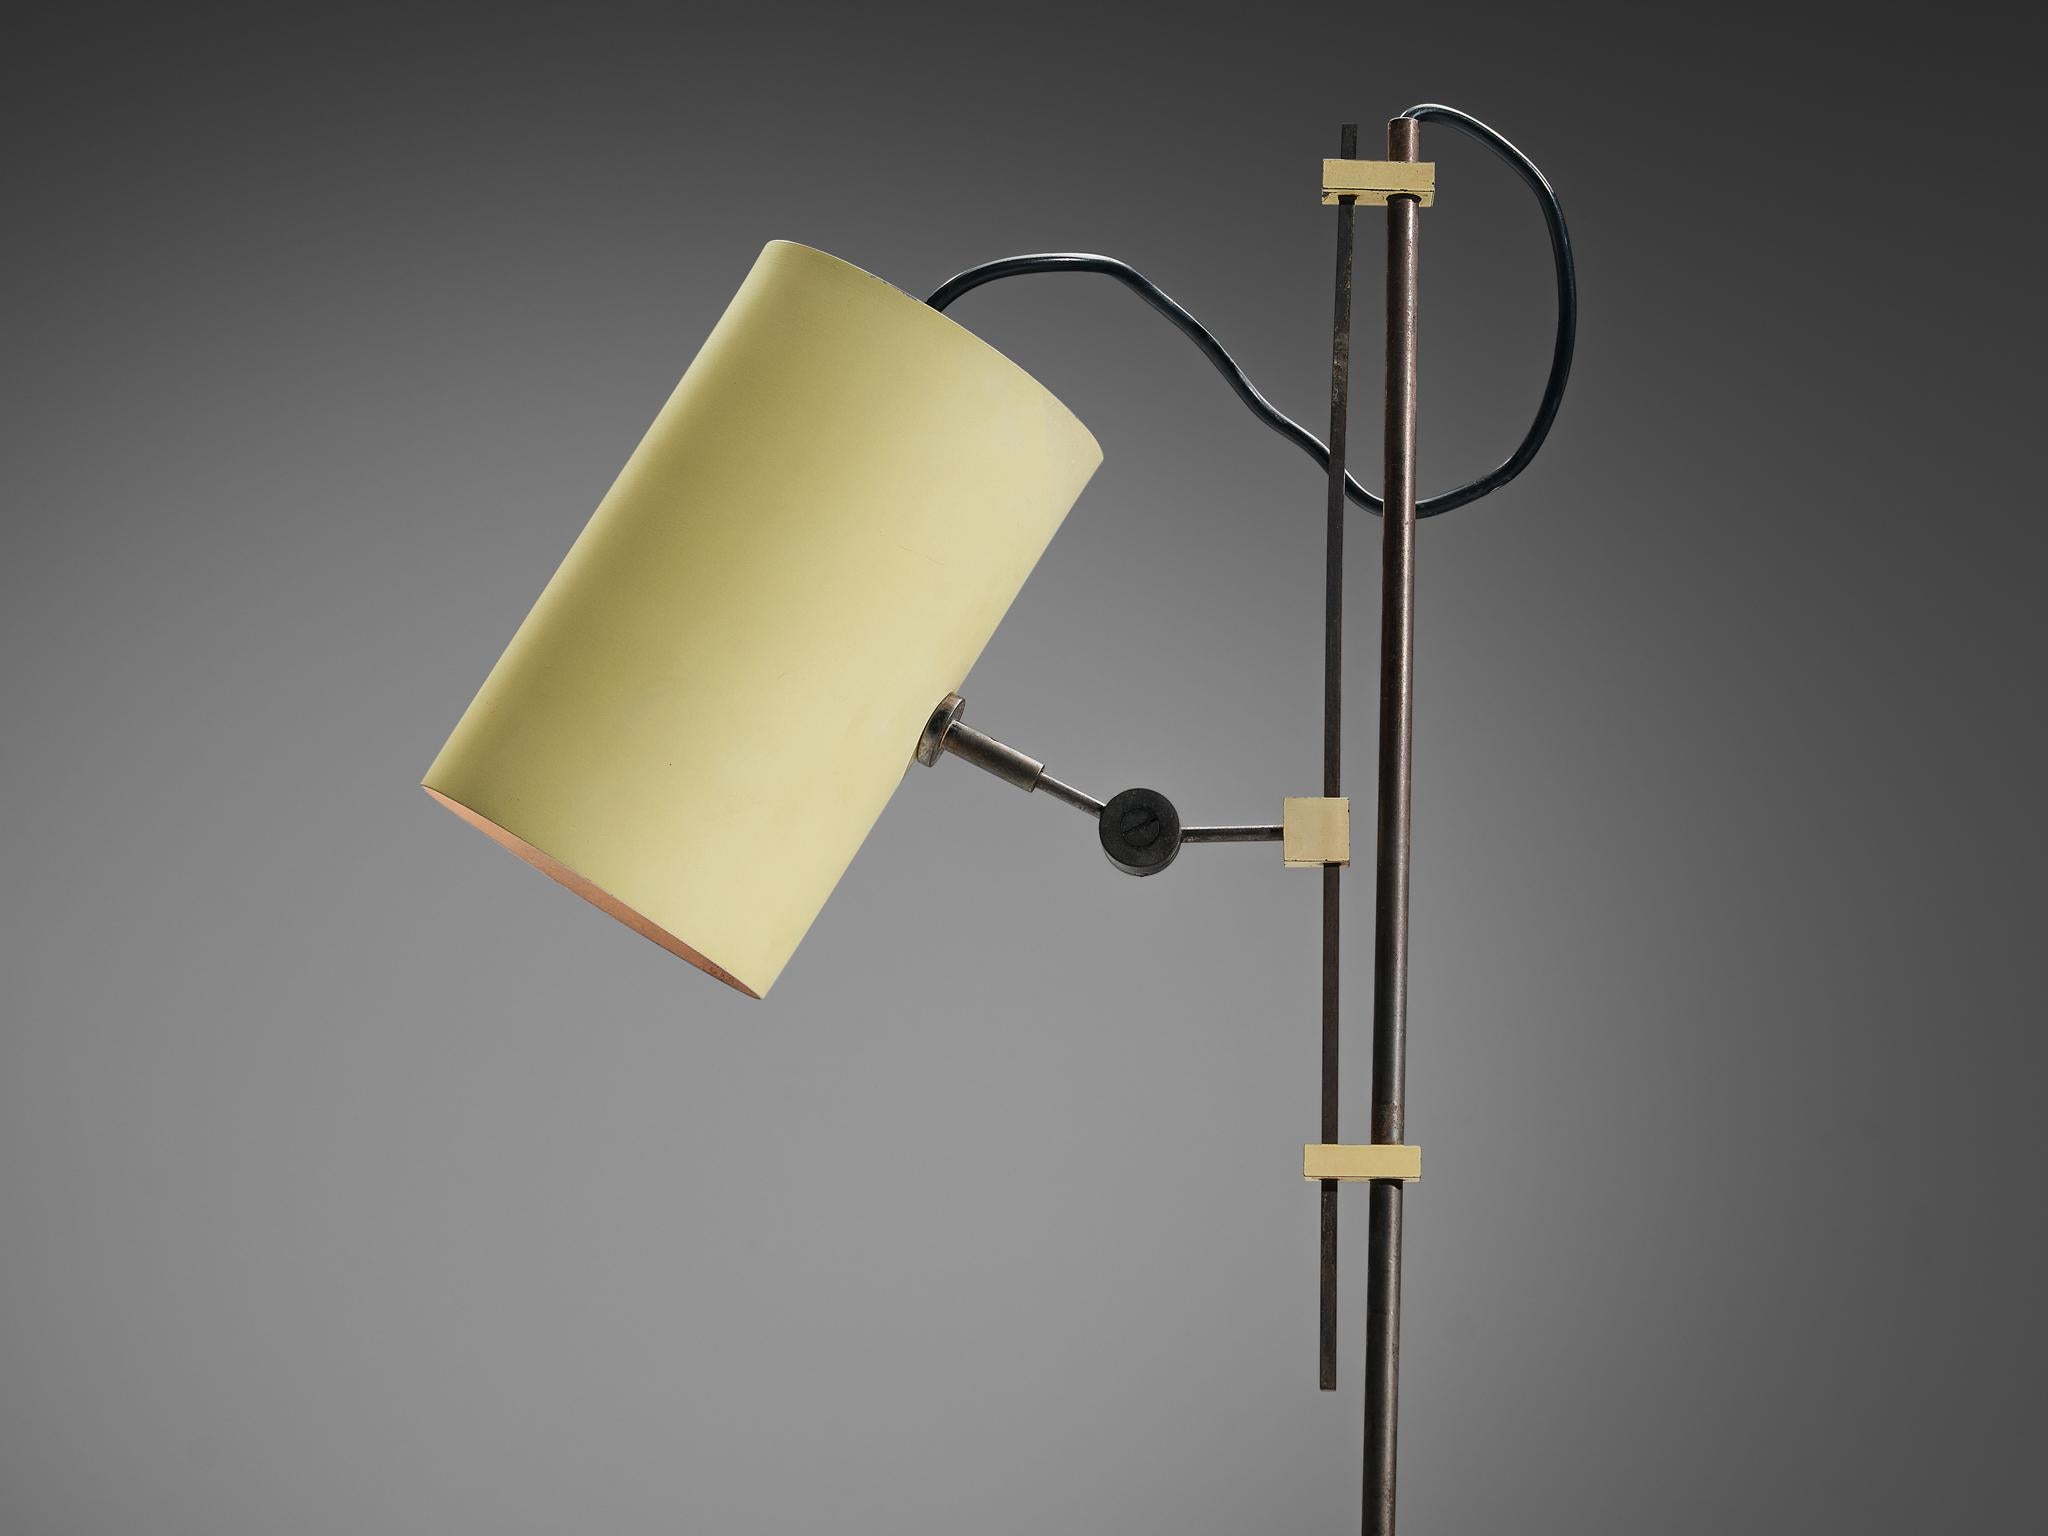 Tito Agnoli for O-Luce, floor lamp, model ‘367’, coated steel, nickel-plated steel, coated aluminum, Italy, design 1954, production 1950s

The floor lamp, model 367, was meticulously designed by the renowned Italian designer Tito Agnoli in 1954 for